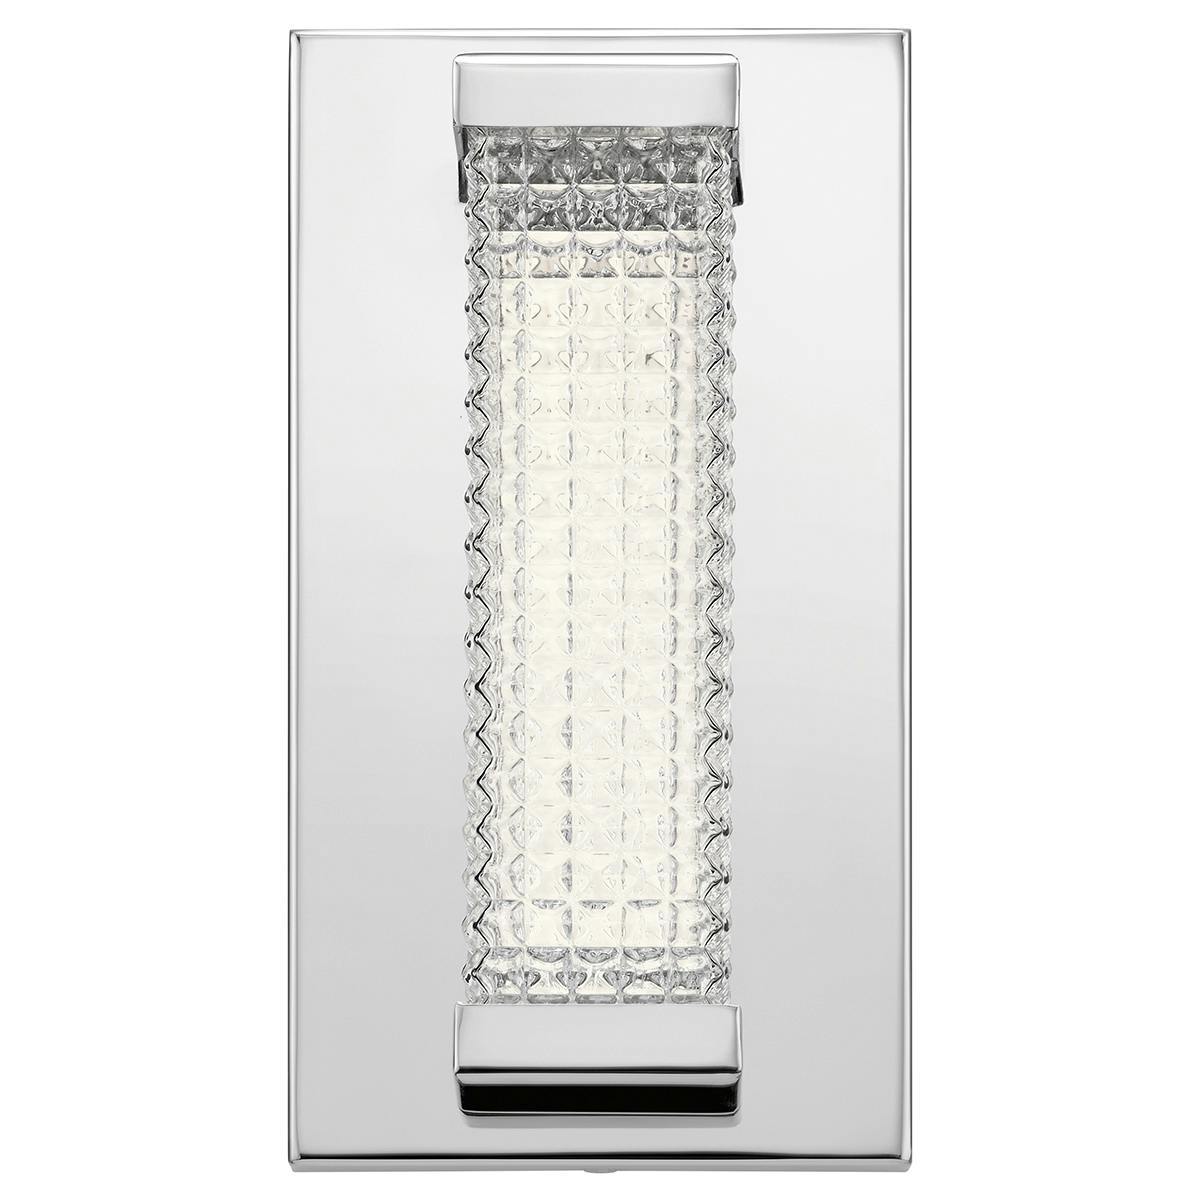 Front view of the Ammiras 3000K LED 1 Light Sconce Chrome on a white background